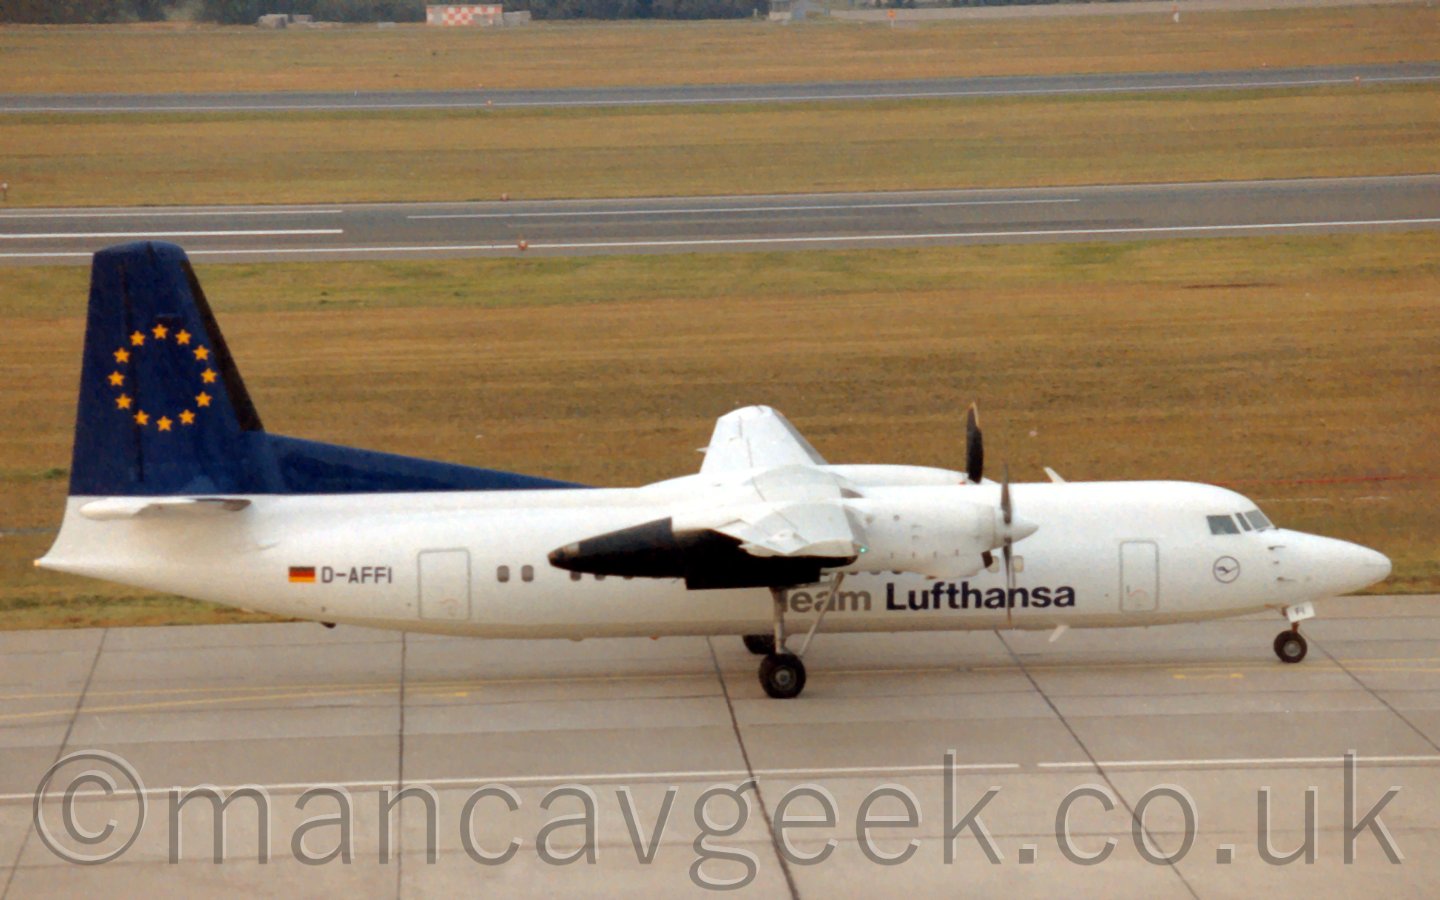 Side view of a twin propellor engined, high-winged airliner taxiing from left to right. The planes body is mostly white, with large "Team Lufthansa" titles on the lower fuselage in grey and dark blue, while the tail is dark blue with a ring of 12 5-pointed gold stars. The background is mostly grass, with a couple of strips of runway visible.